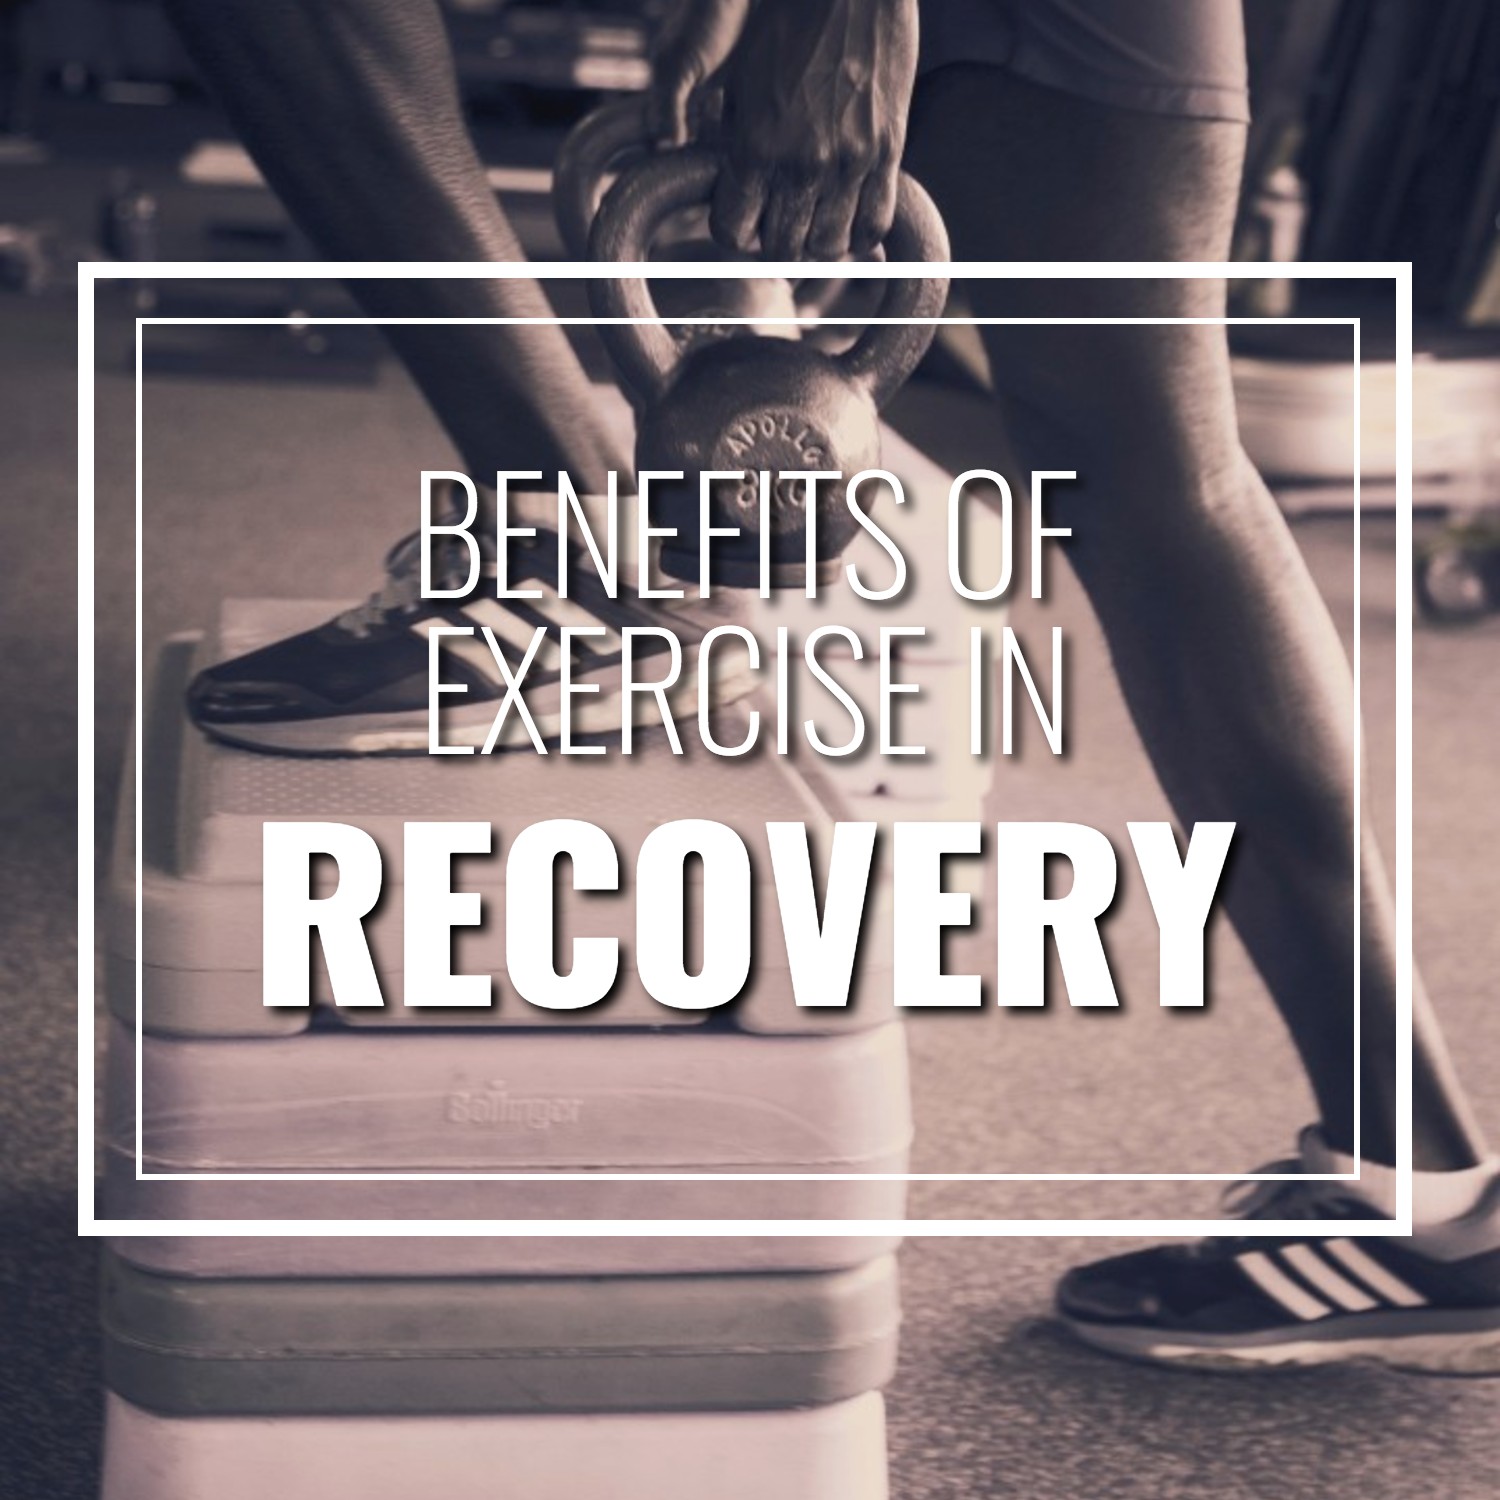 person using kettle bells to exercise - Benefits of exercise in recovery